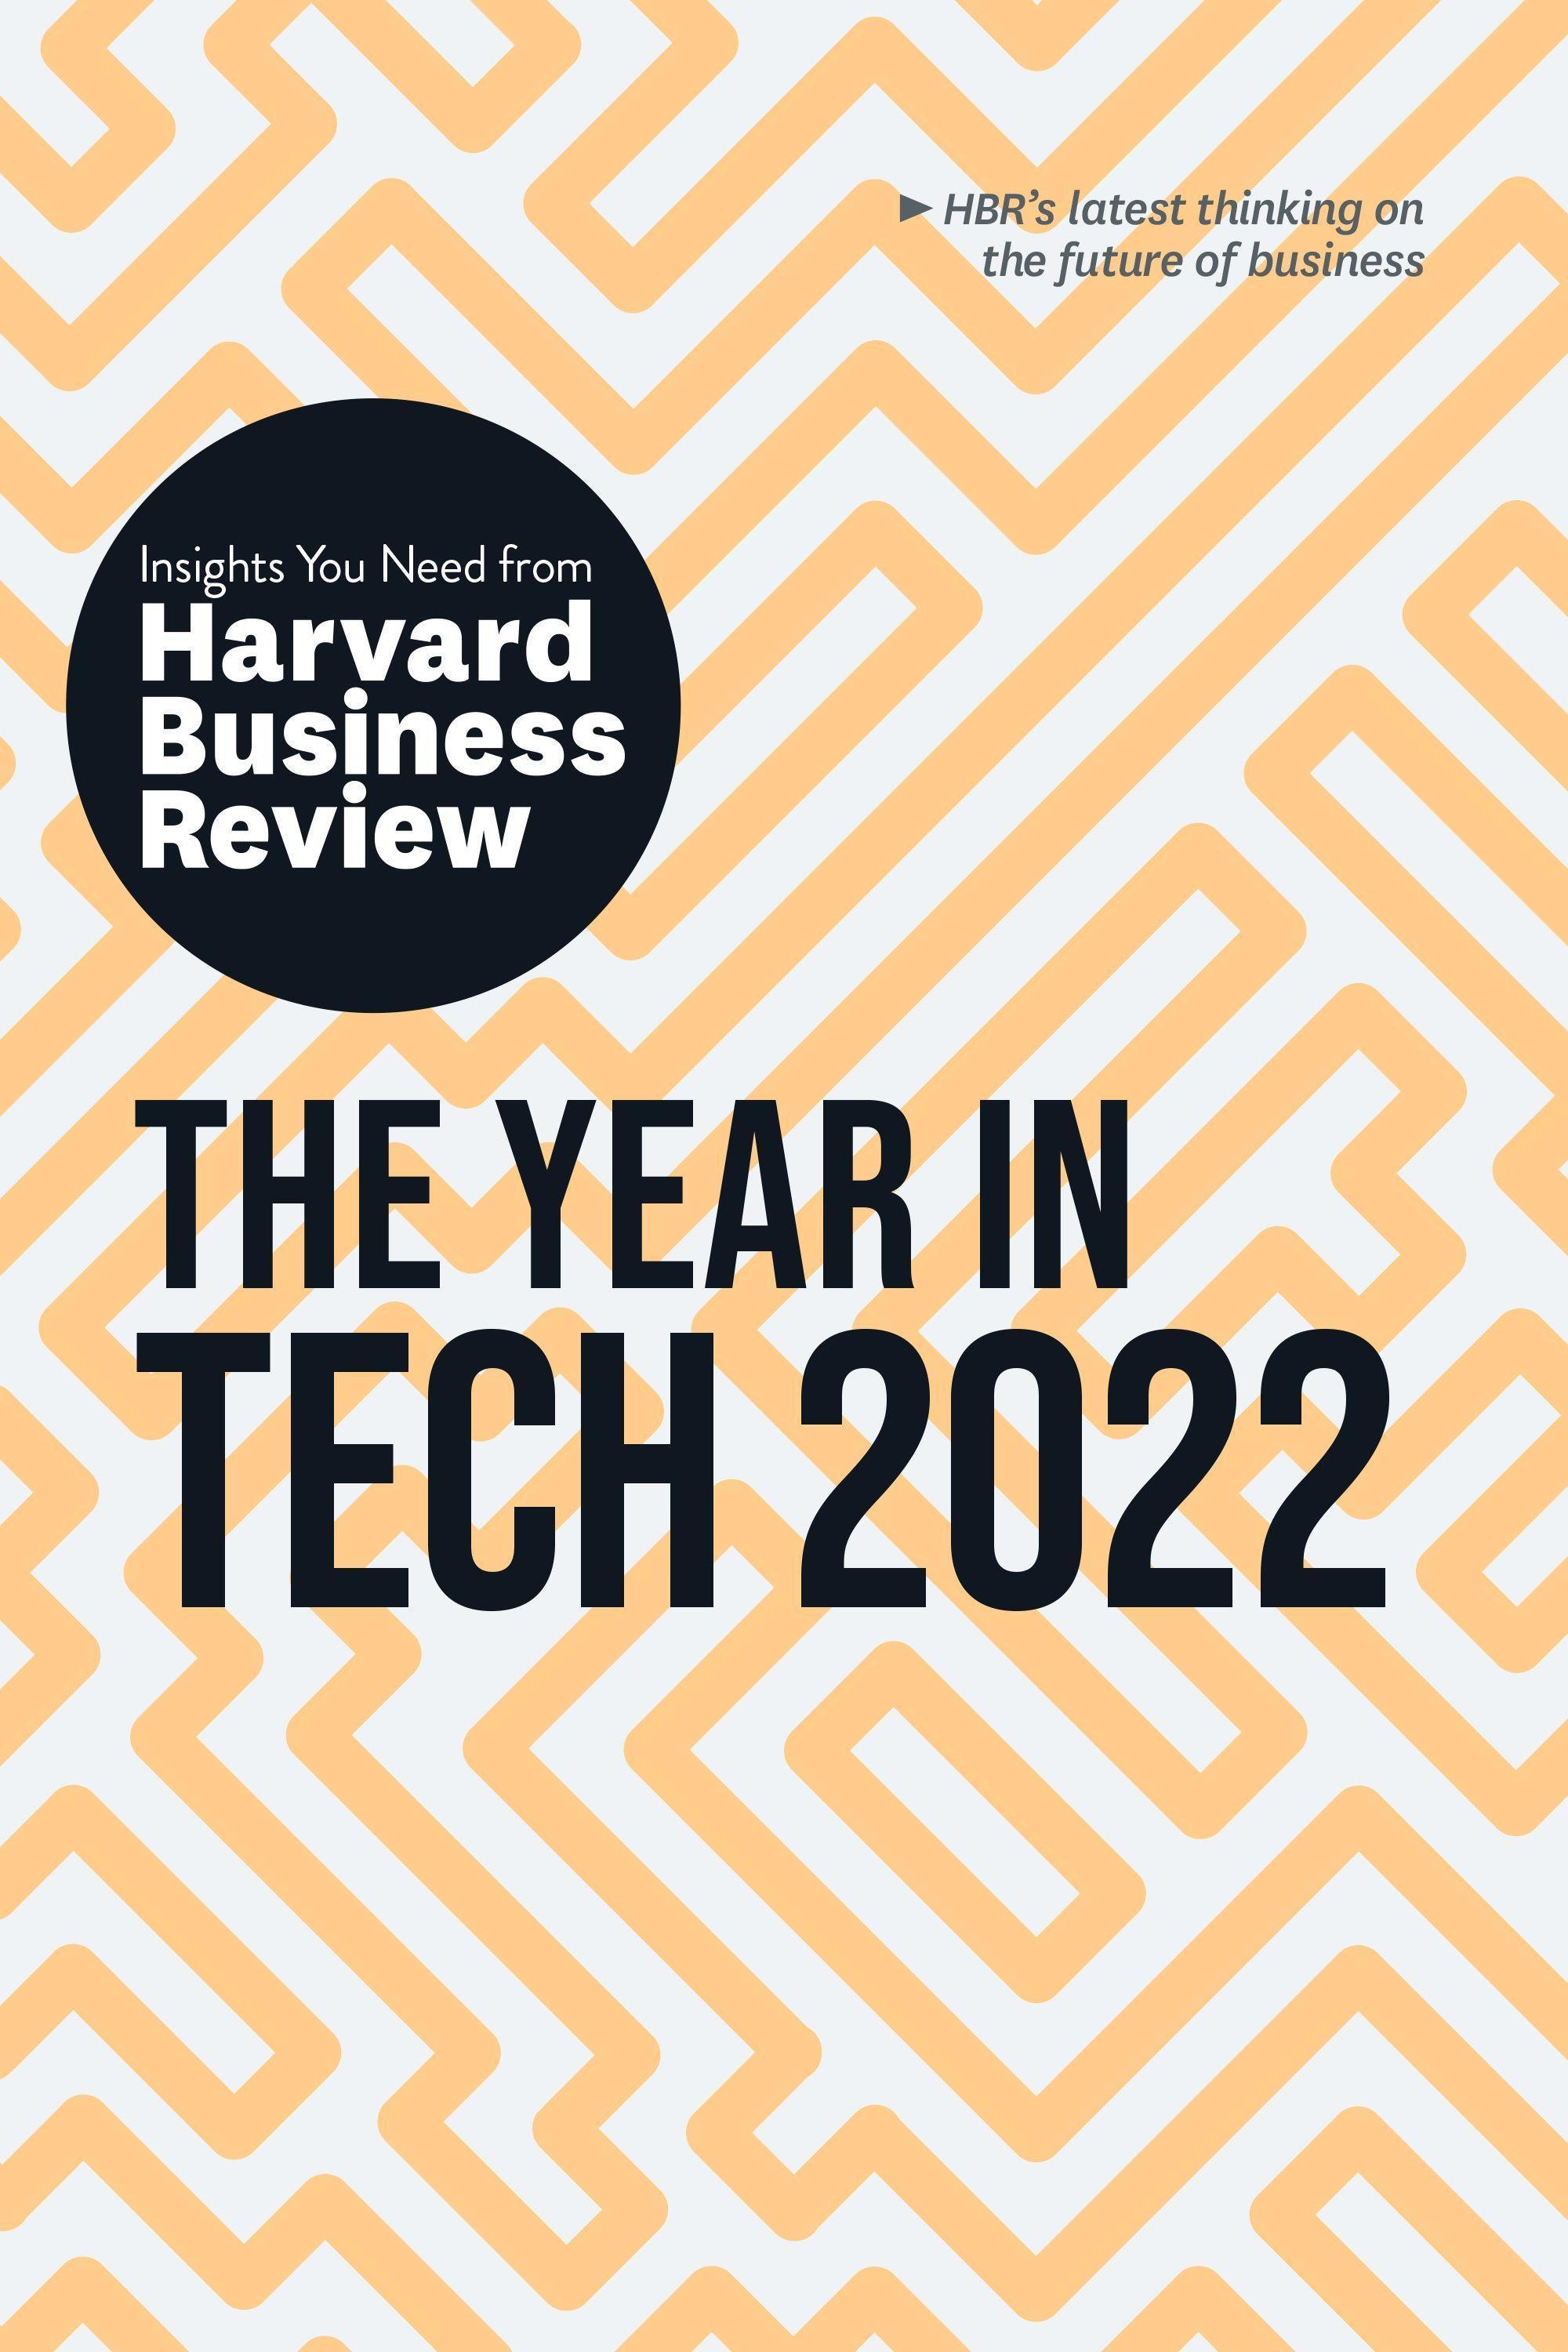 Hbr Insights Series / The Year In Tech 2022: The Insights You Need From Harvard Business Review - Harvard Business Review  Larry Downes  Jeanne C. Mei